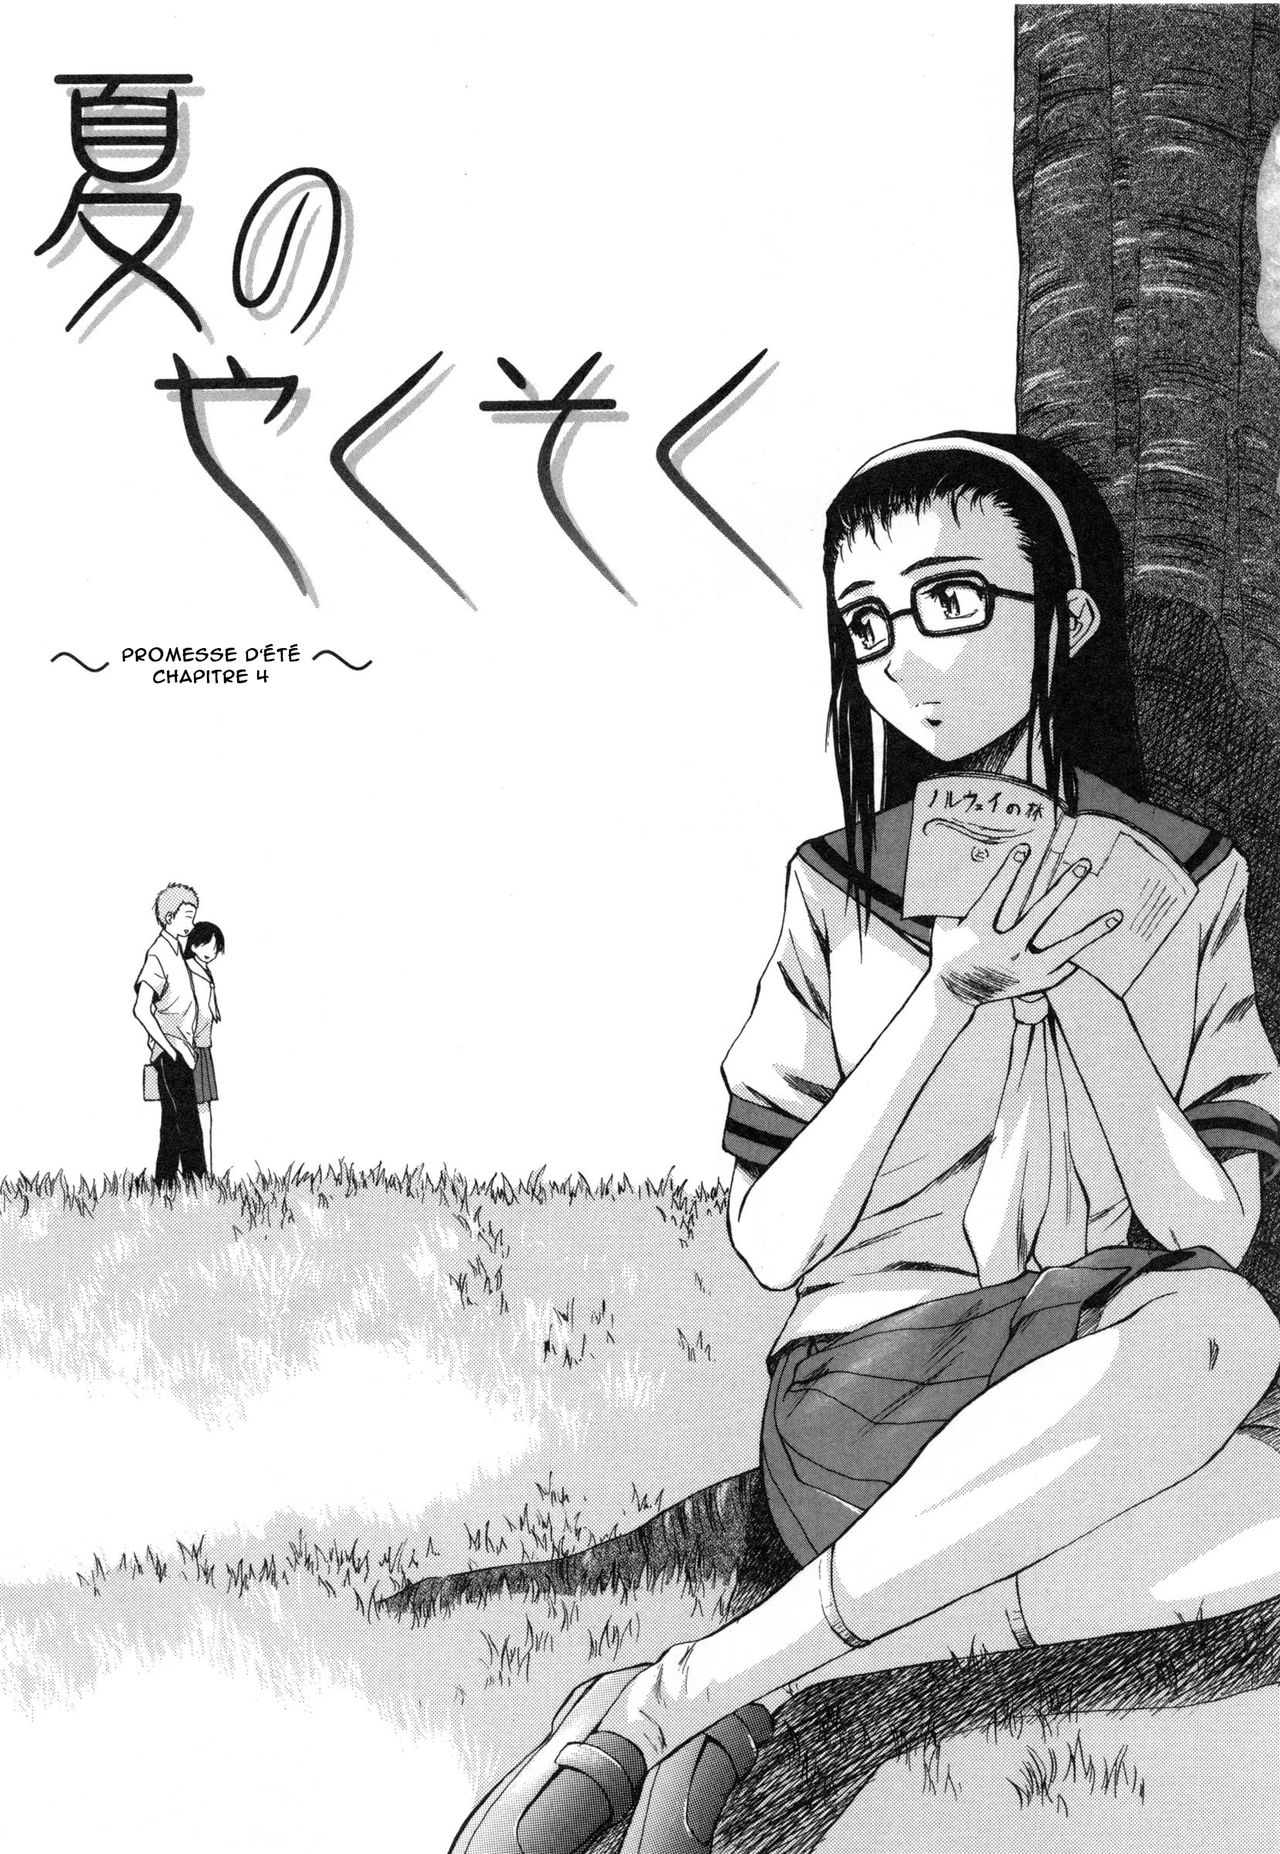 [Fuuga] Kyoushi to Seito to - Teacher and Student | Élève et Professeur Ch. 4 [French] [O-S] [楓牙] 教師と生徒と 第4話 [フランス翻訳]